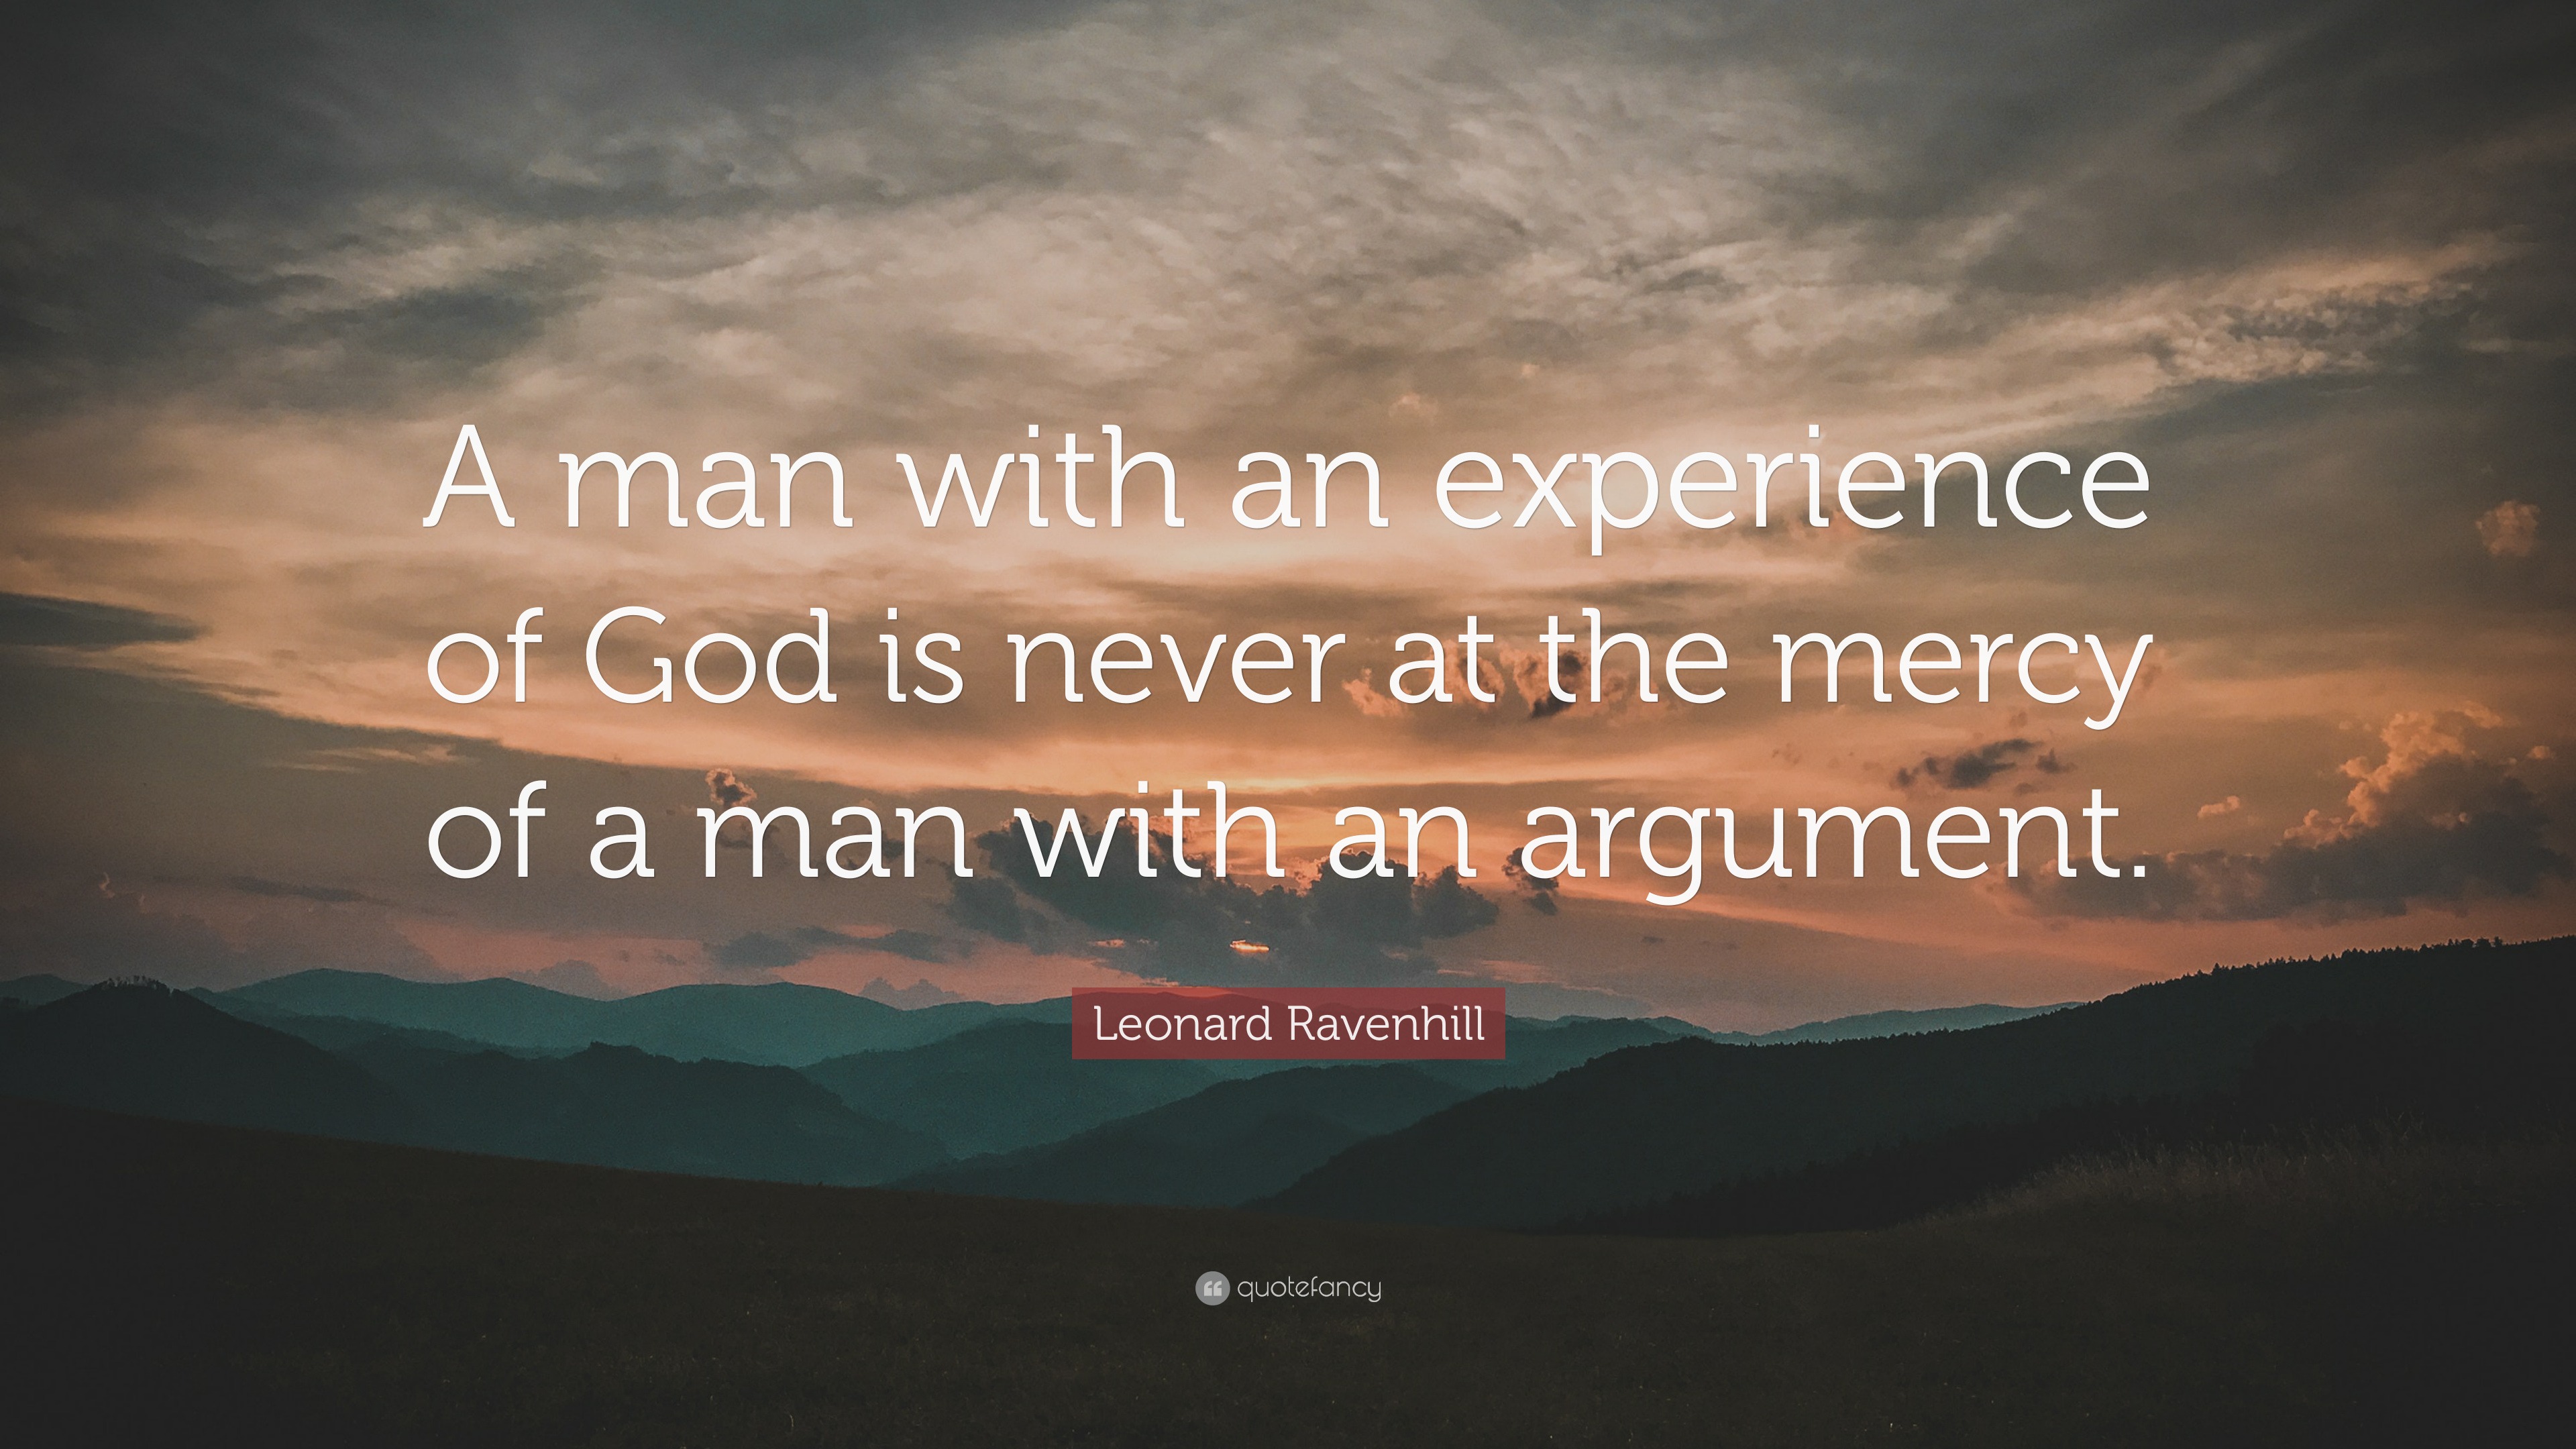 4730716 Leonard Ravenhill Quote A man with an experience of God is never